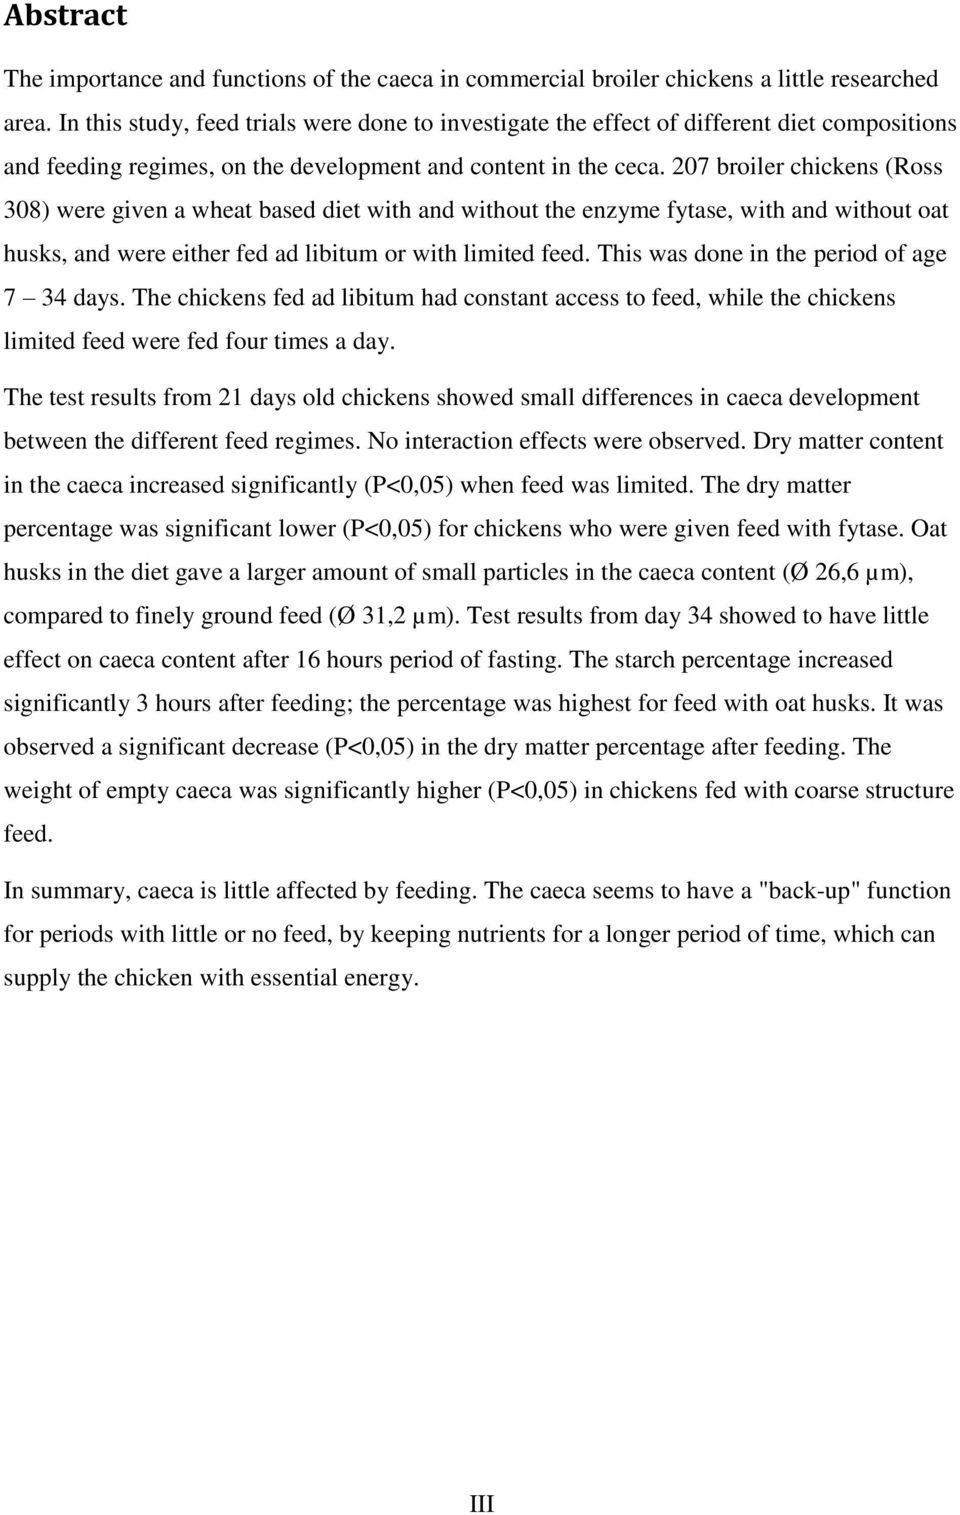 207 broiler chickens (Ross 308) were given a wheat based diet with and without the enzyme fytase, with and without oat husks, and were either fed ad libitum or with limited feed.